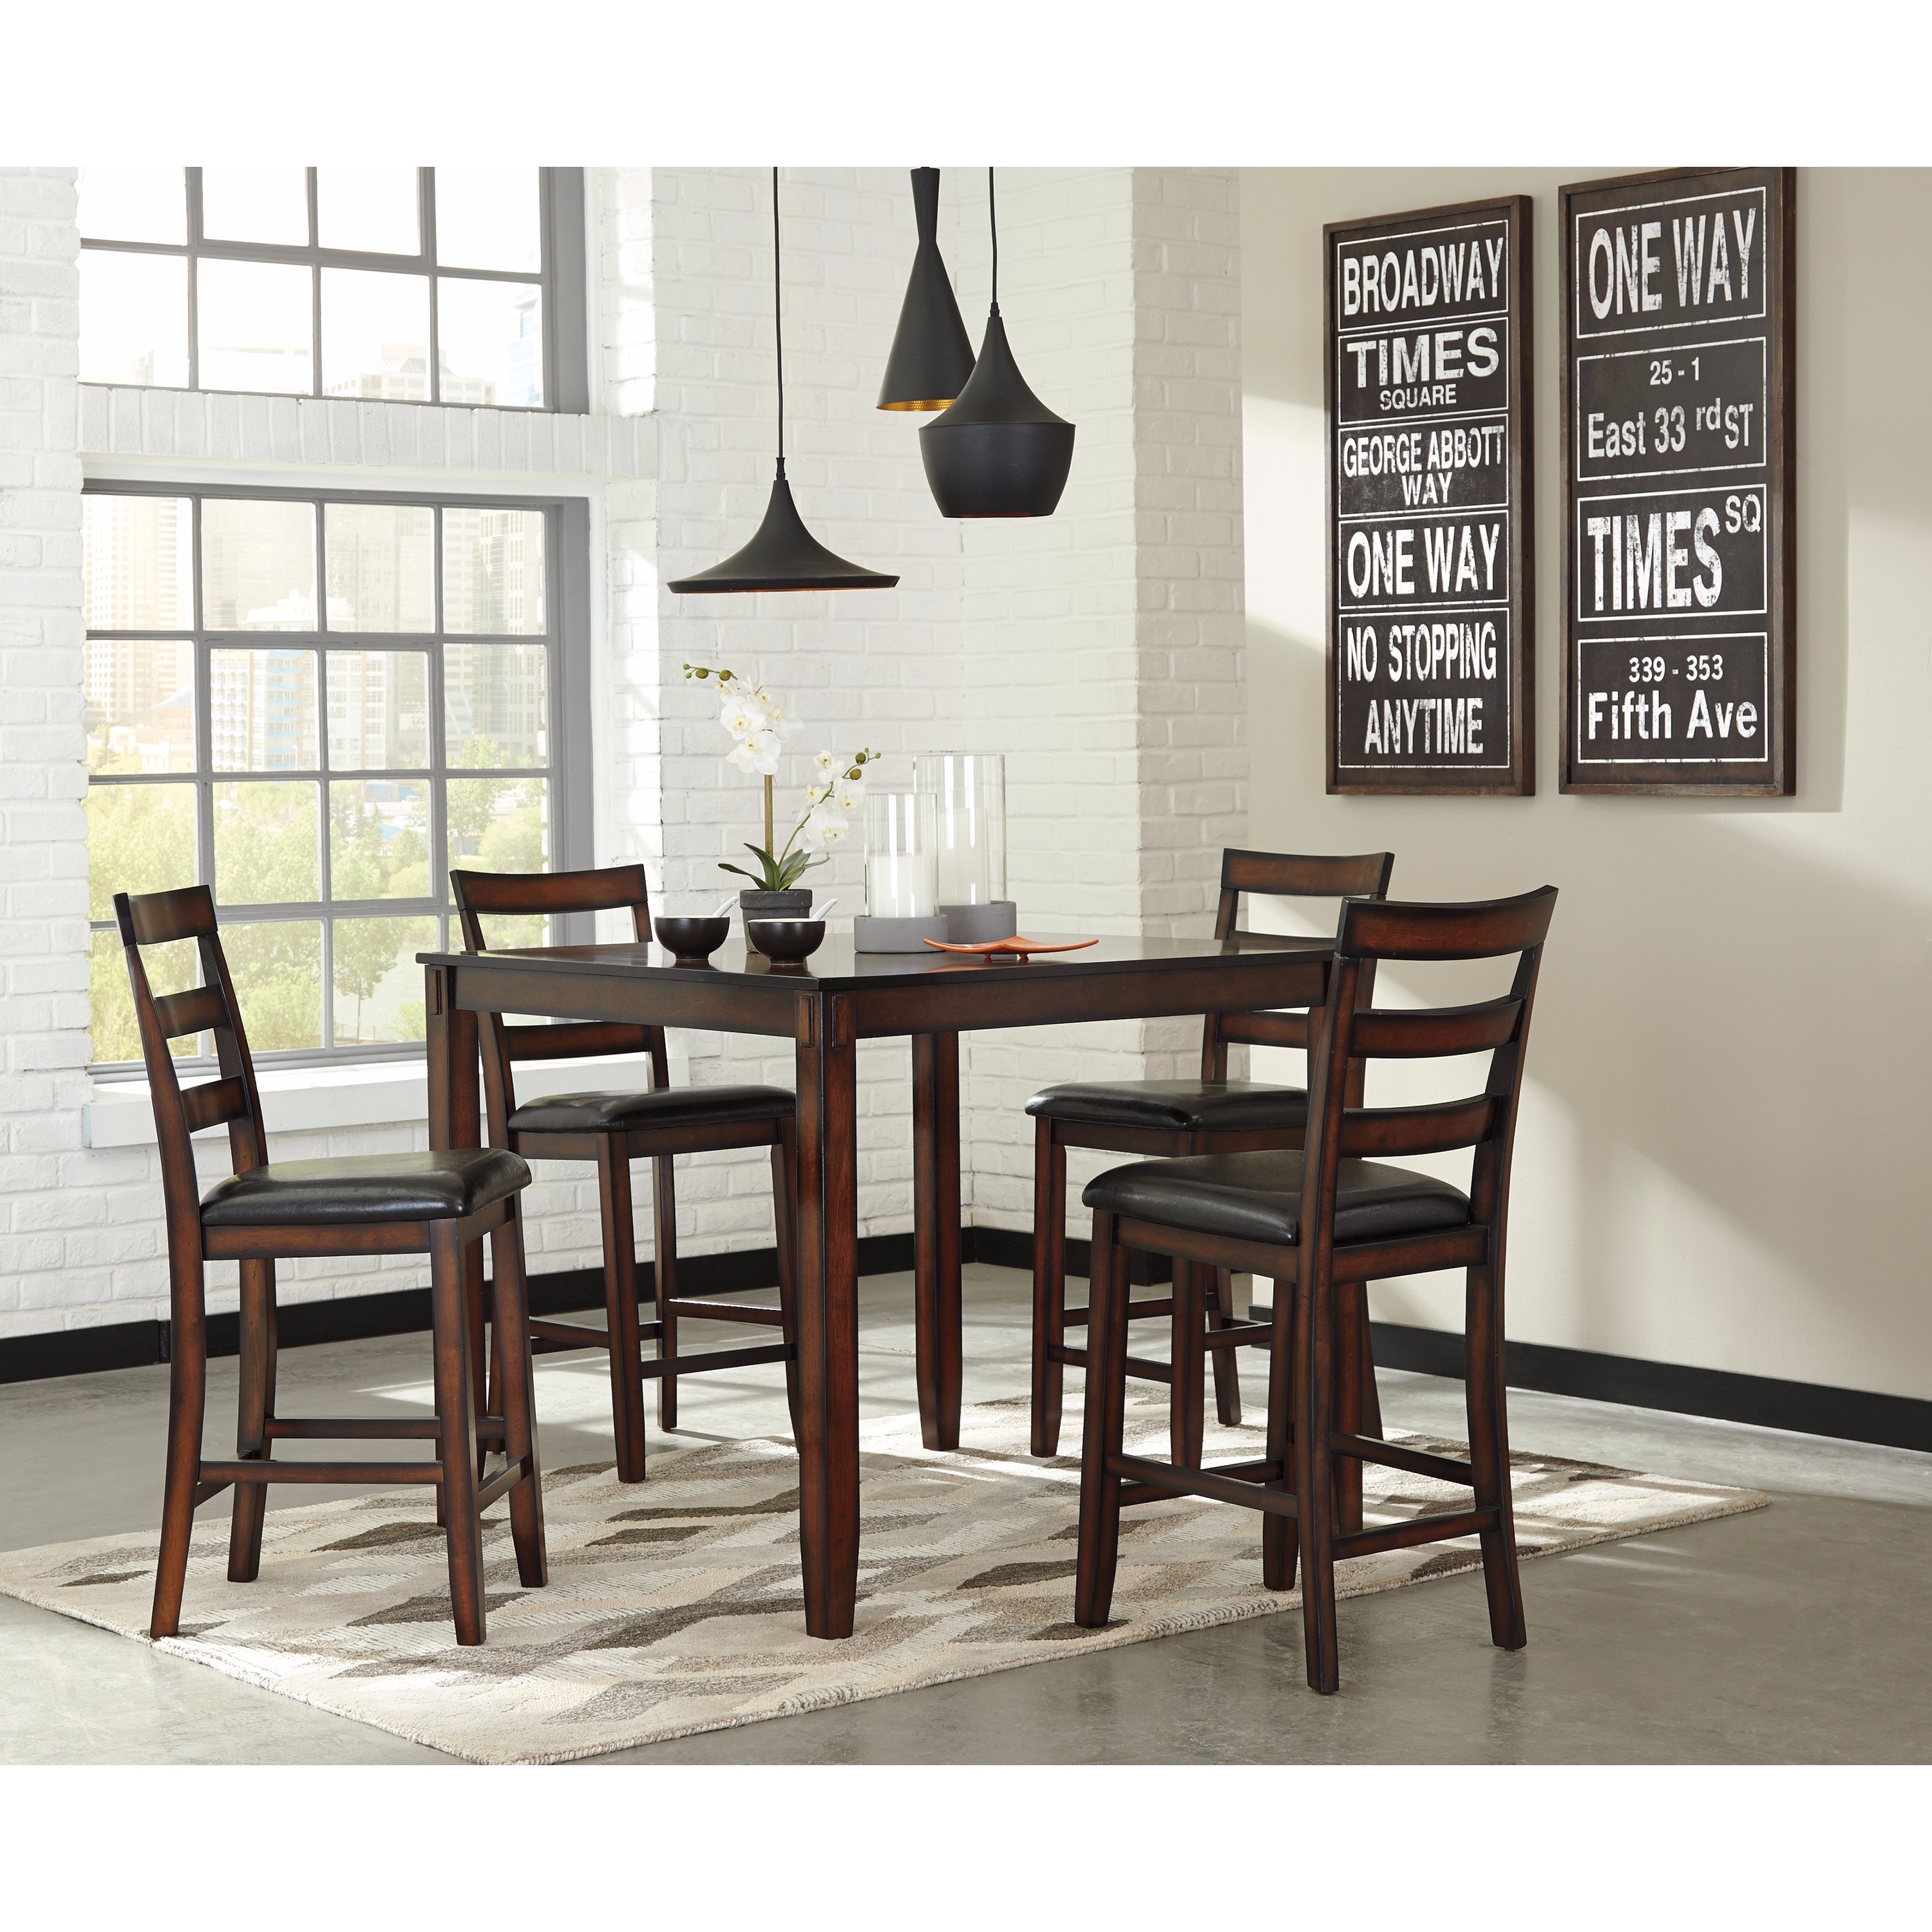 Brown Ashley Furniture Signature Design Coviar Dining Room Table And Chairs With Bench Set Of 6